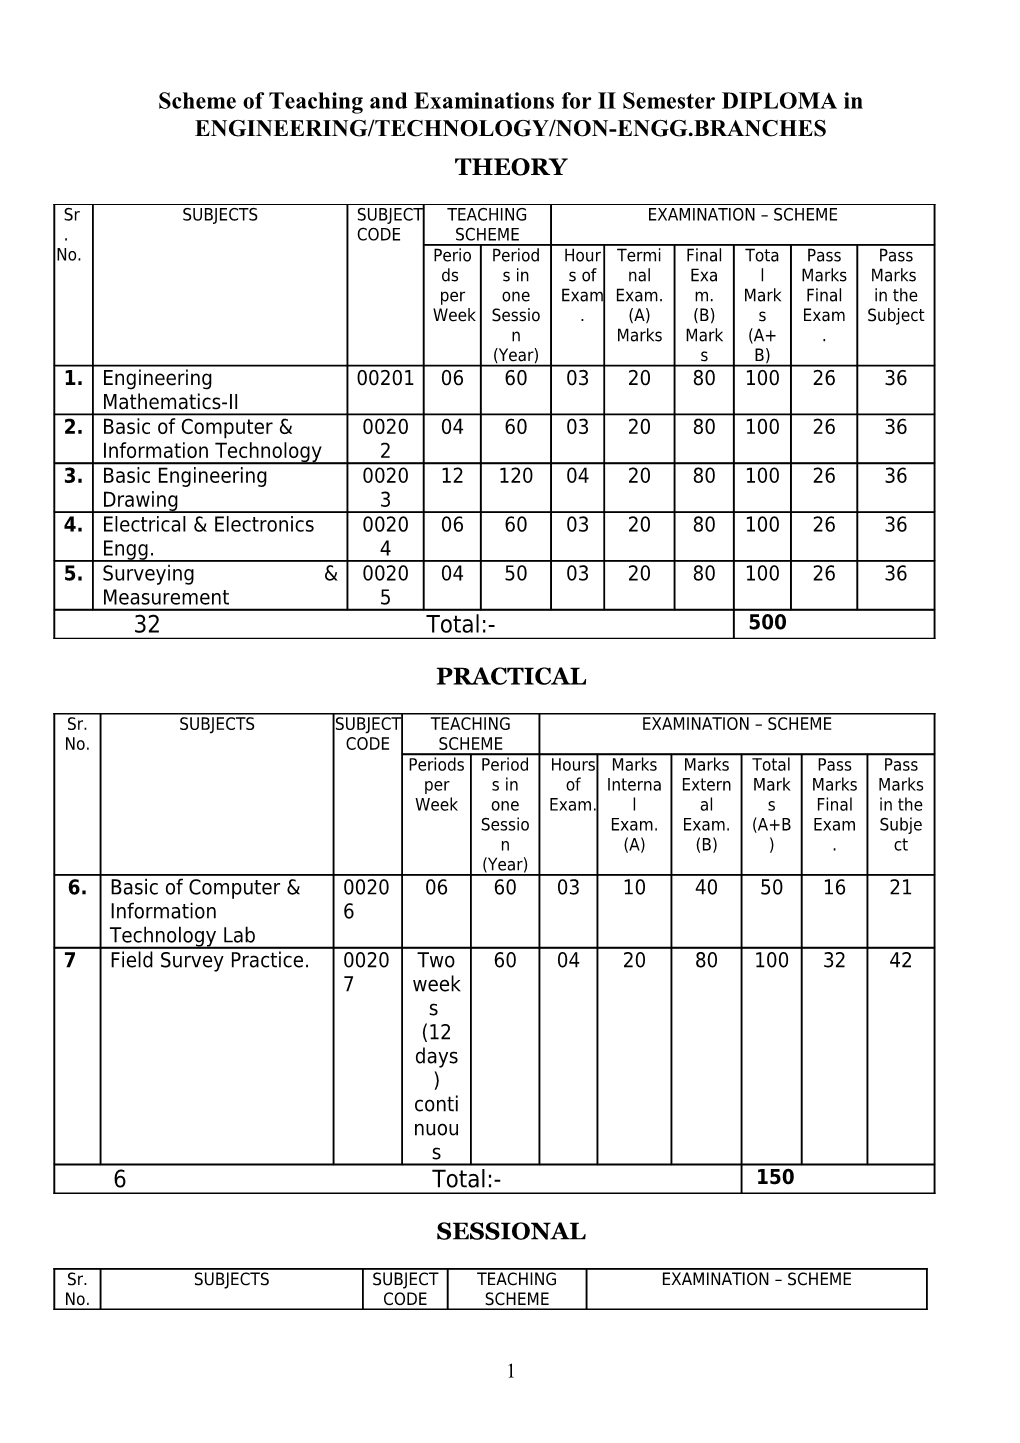 Scheme of Teaching and Examinations for II Semester DIPLOMA In